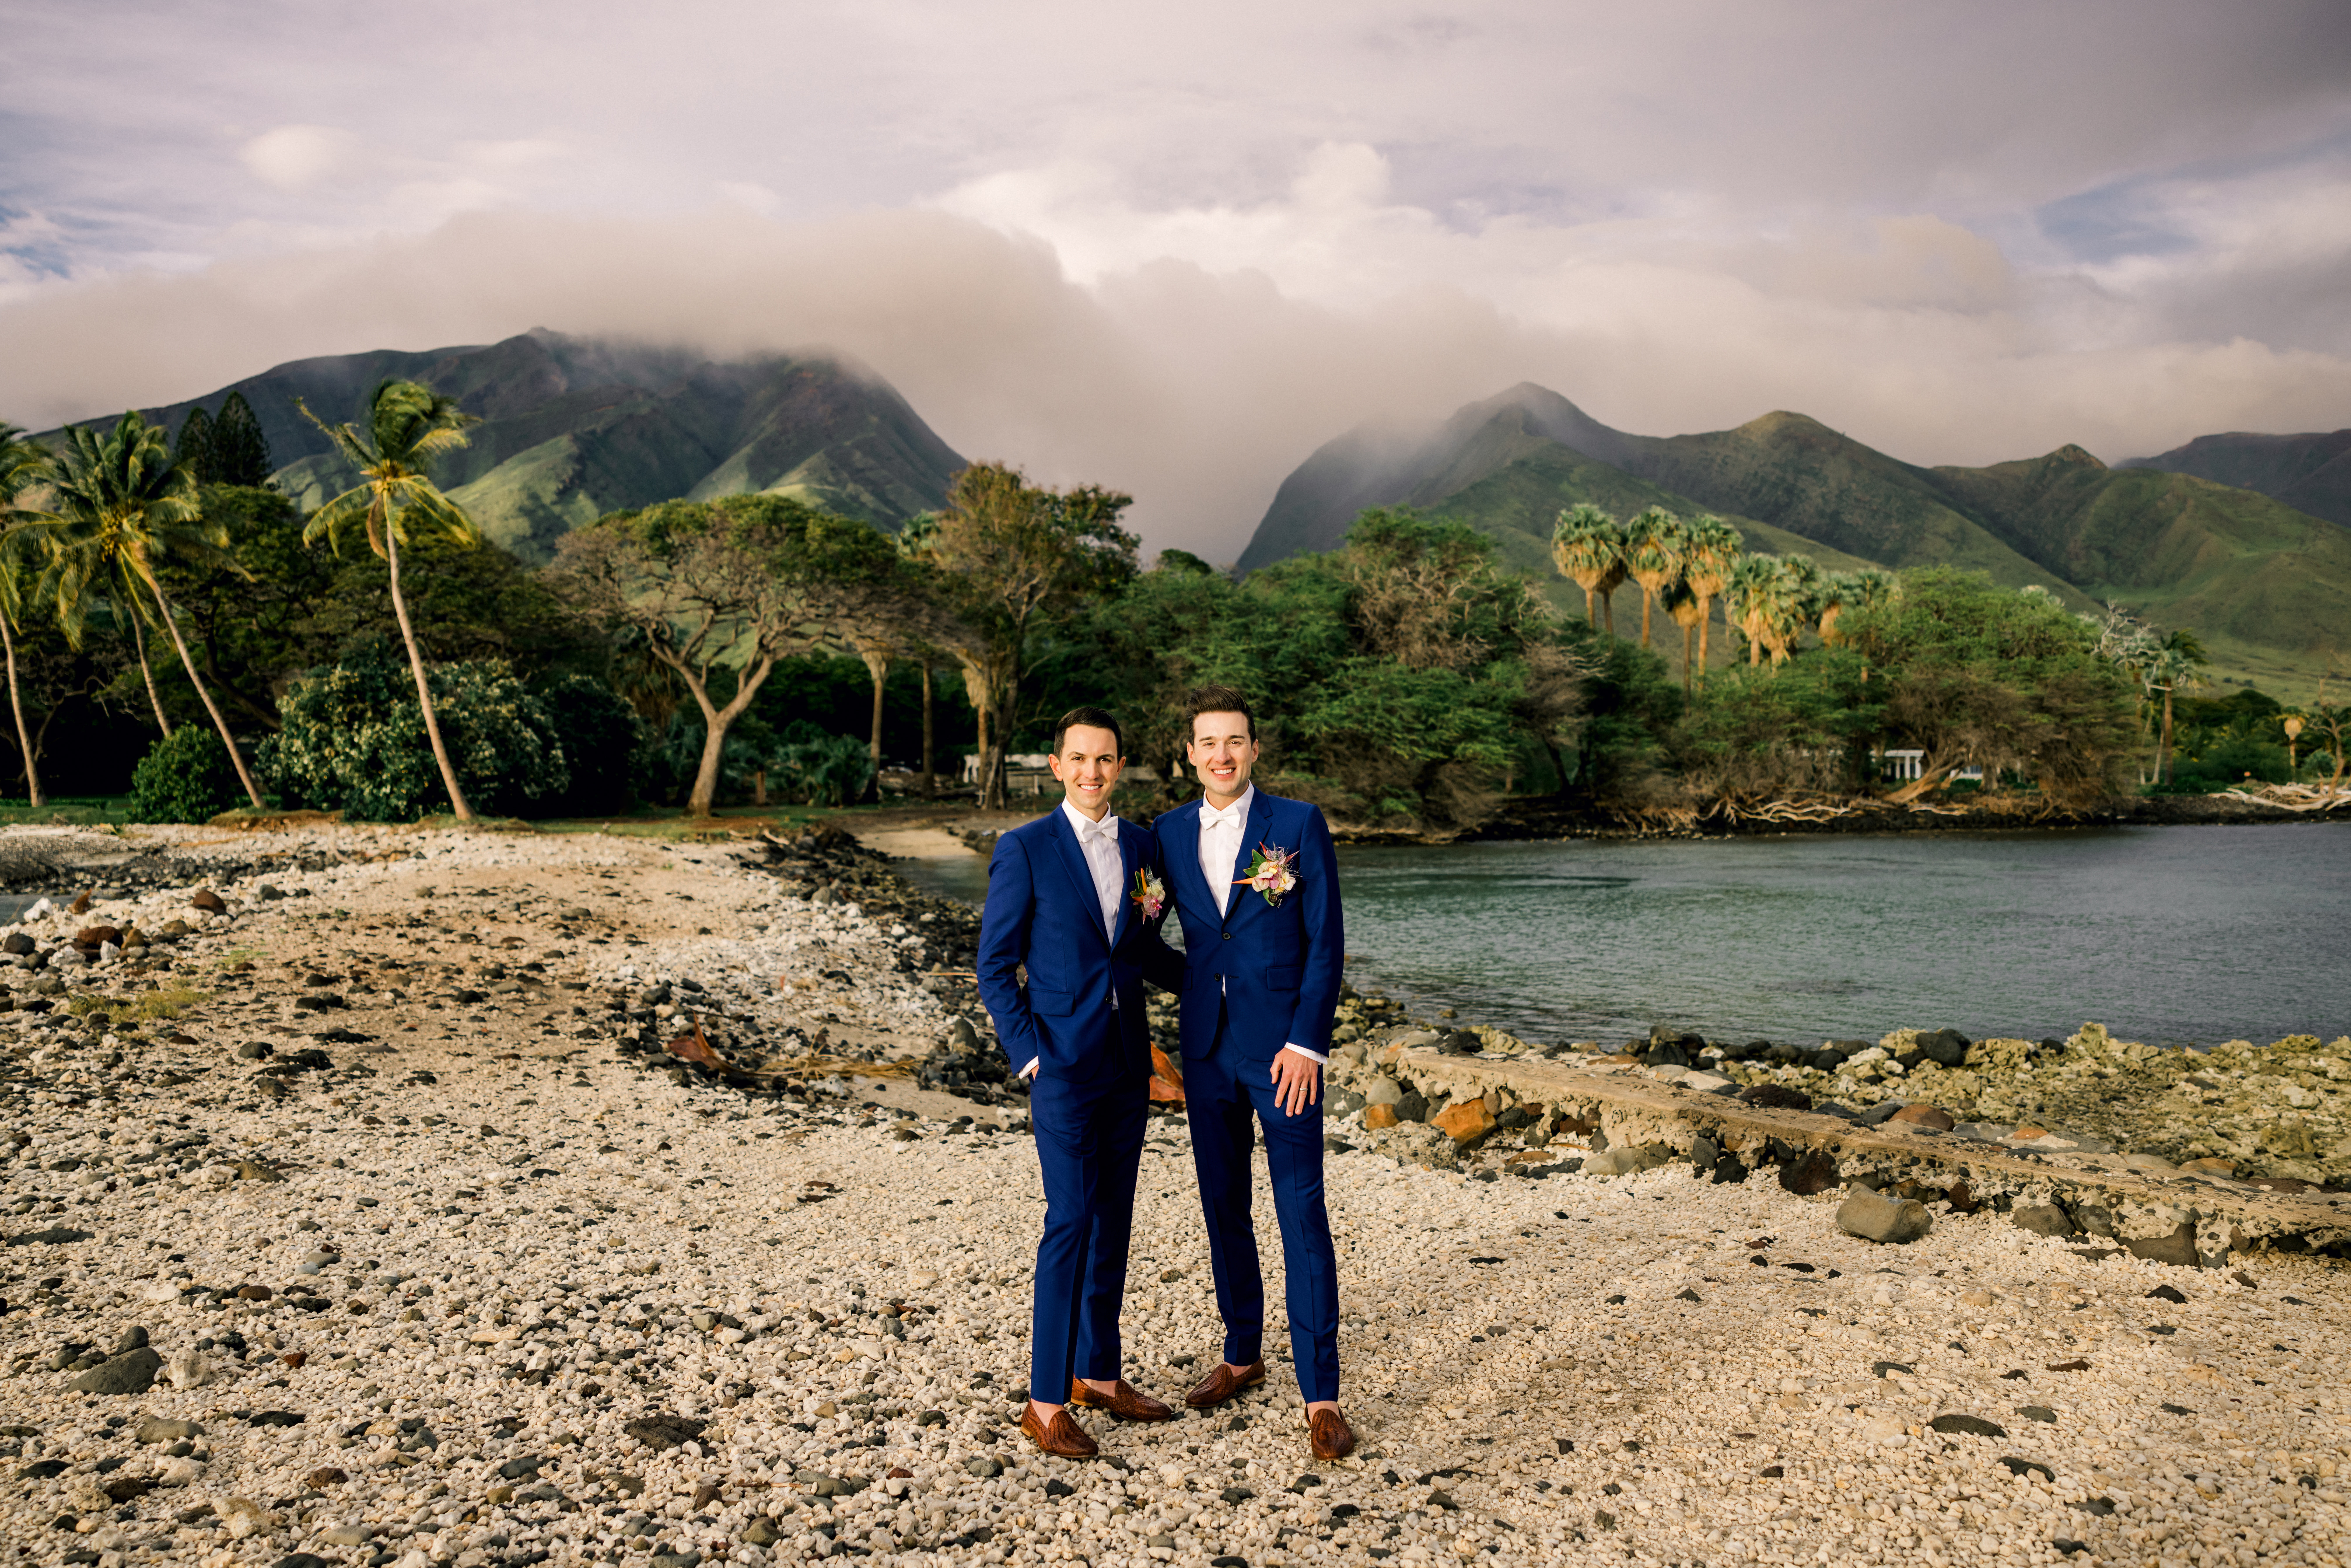 Newlywed portraits standing side by side in matching suit, bow tie, and shoes with the ocean and mountains in the background.